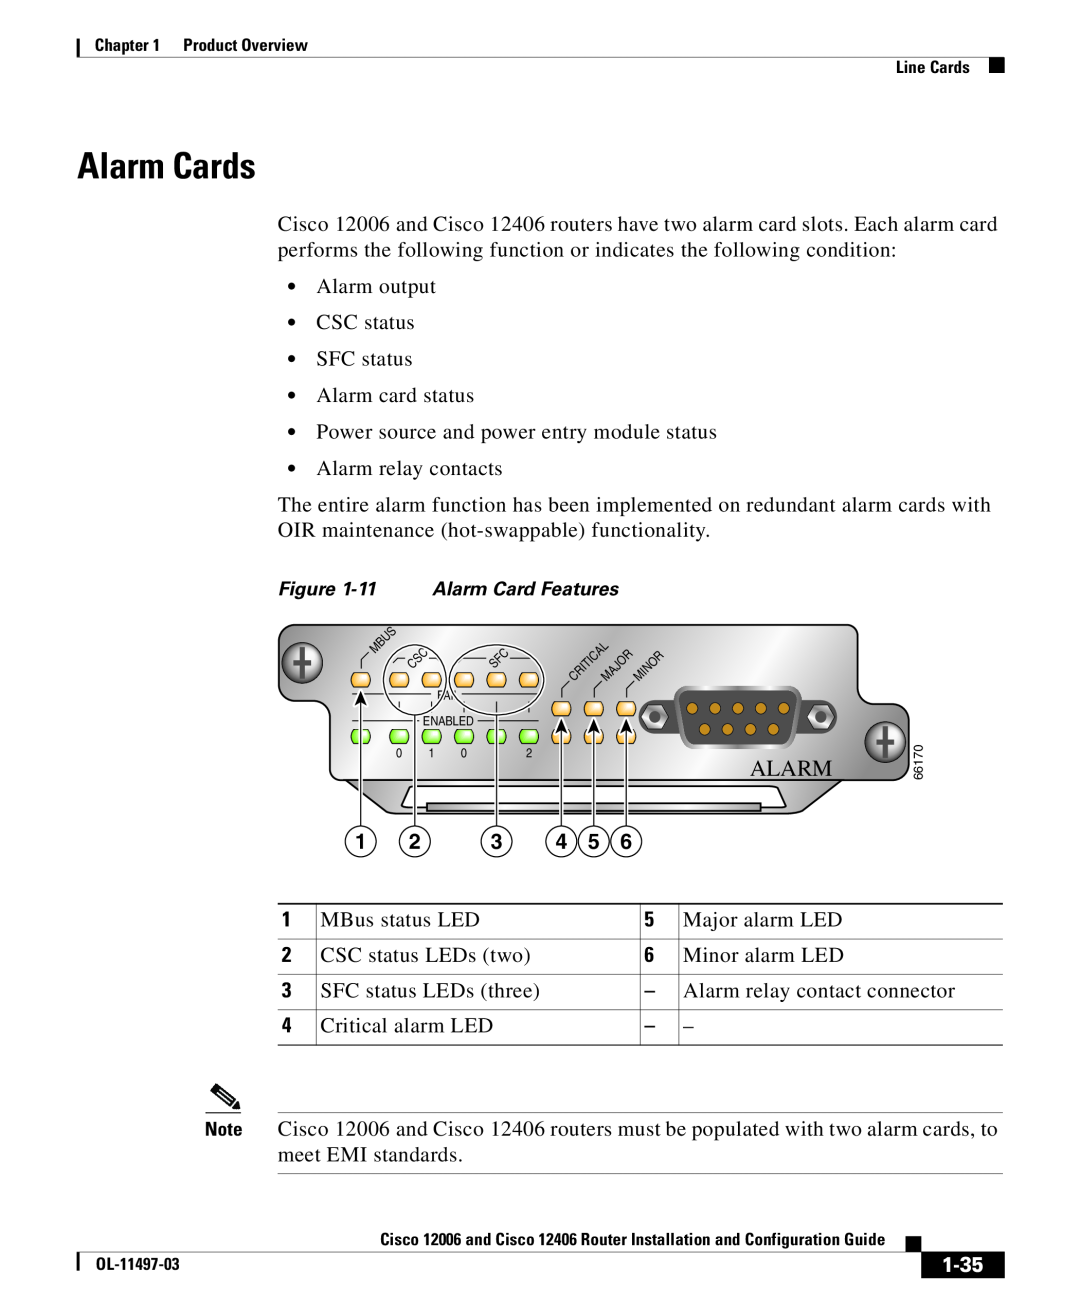 Cisco Systems 12006 series, 12406 series manual Alarm Cards, 1-35 